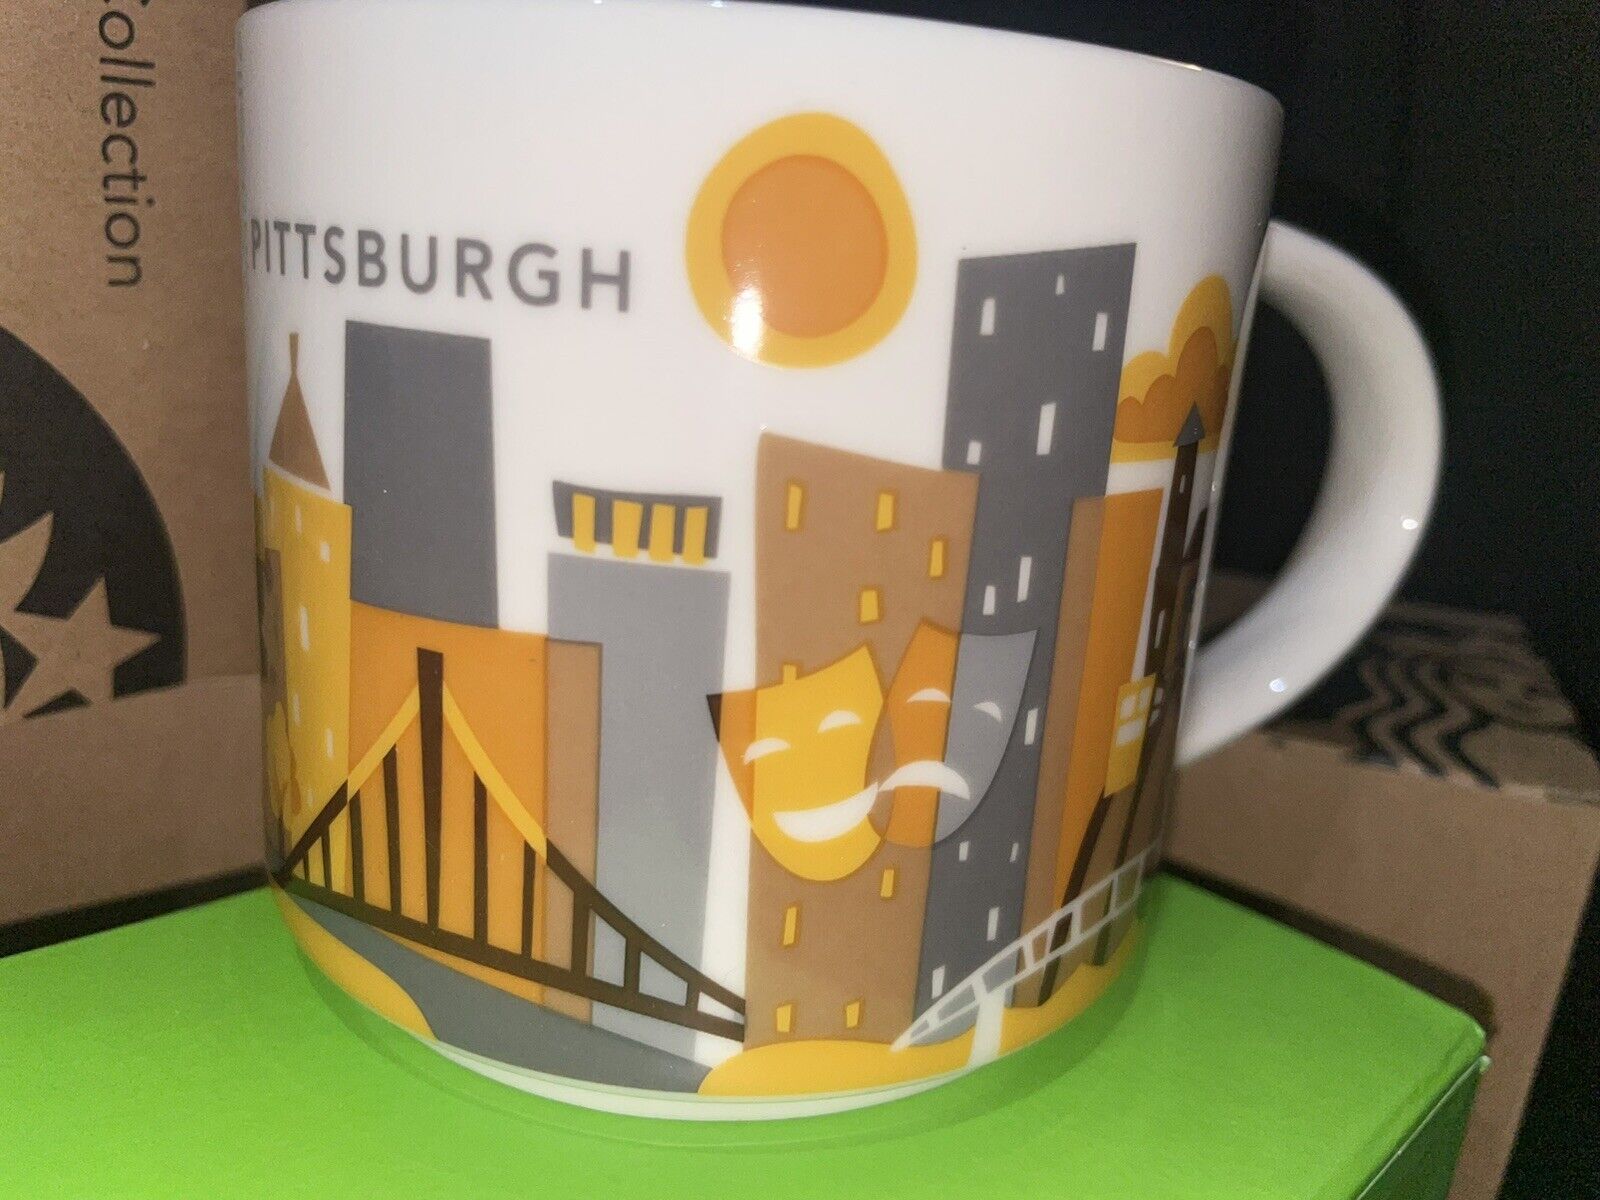 NEW 2017 Starbucks Pittsburg You Are Here Series Collector Coffee Mug Cup 14 Oz